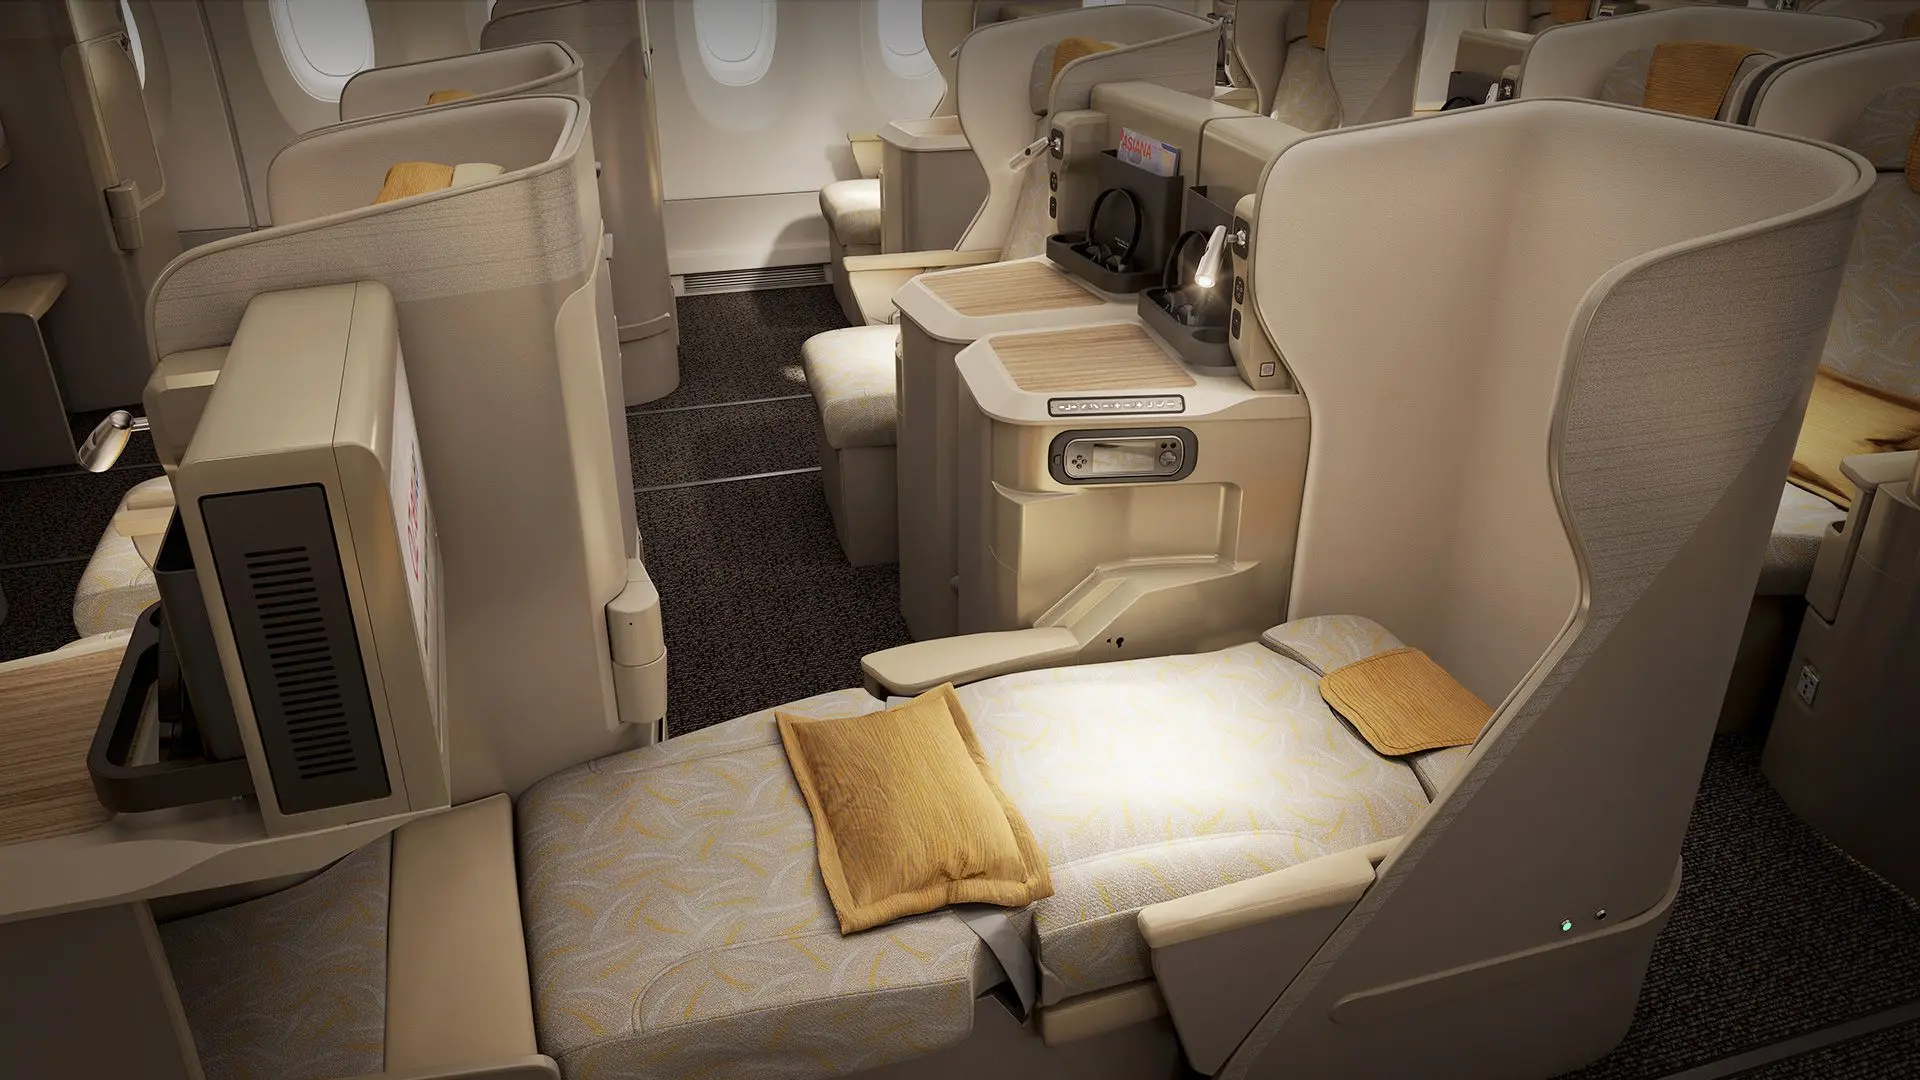 Airline review Cabin & Seat - Asiana - 2